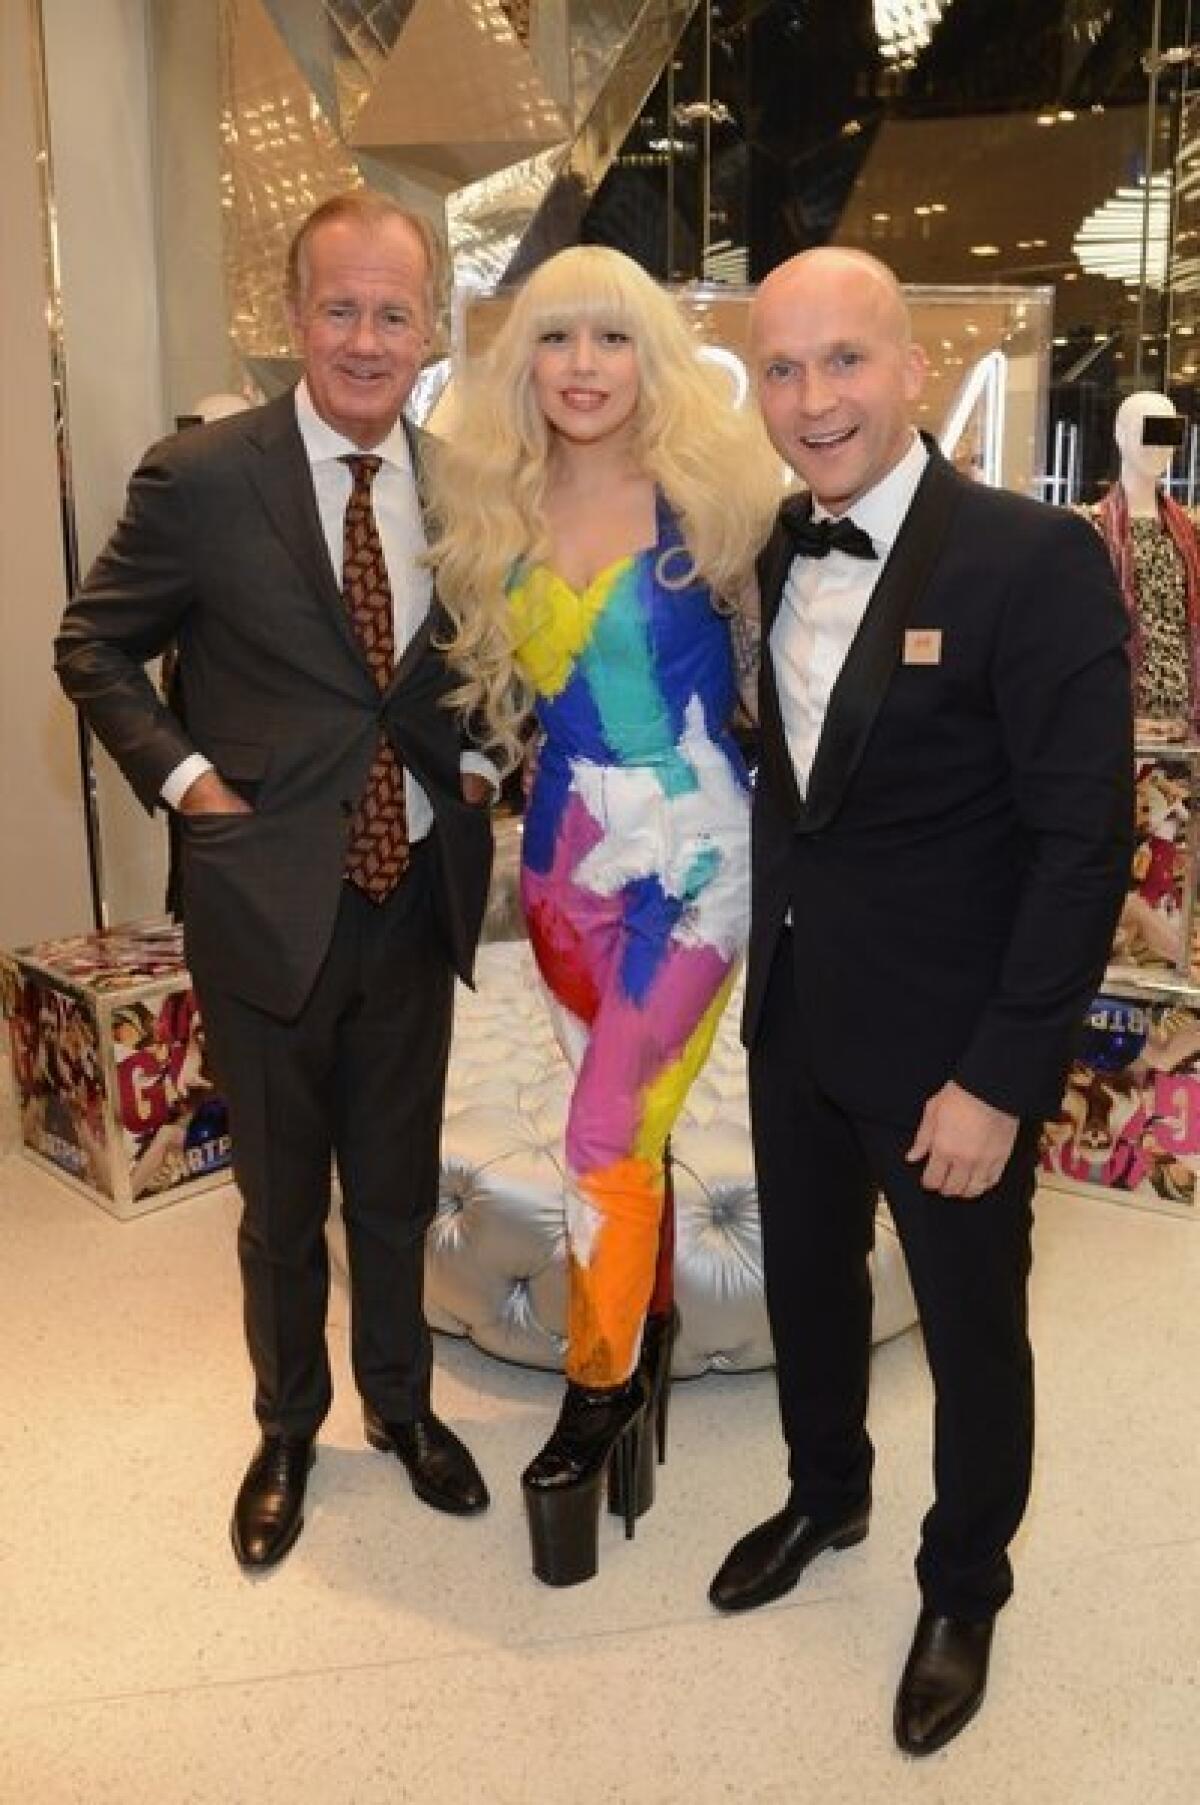 Lady Gaga joined H&M; executives Stefan Persson, left, and Daniel Kulle for the midnight opening of a new H&M; store in Times Square.